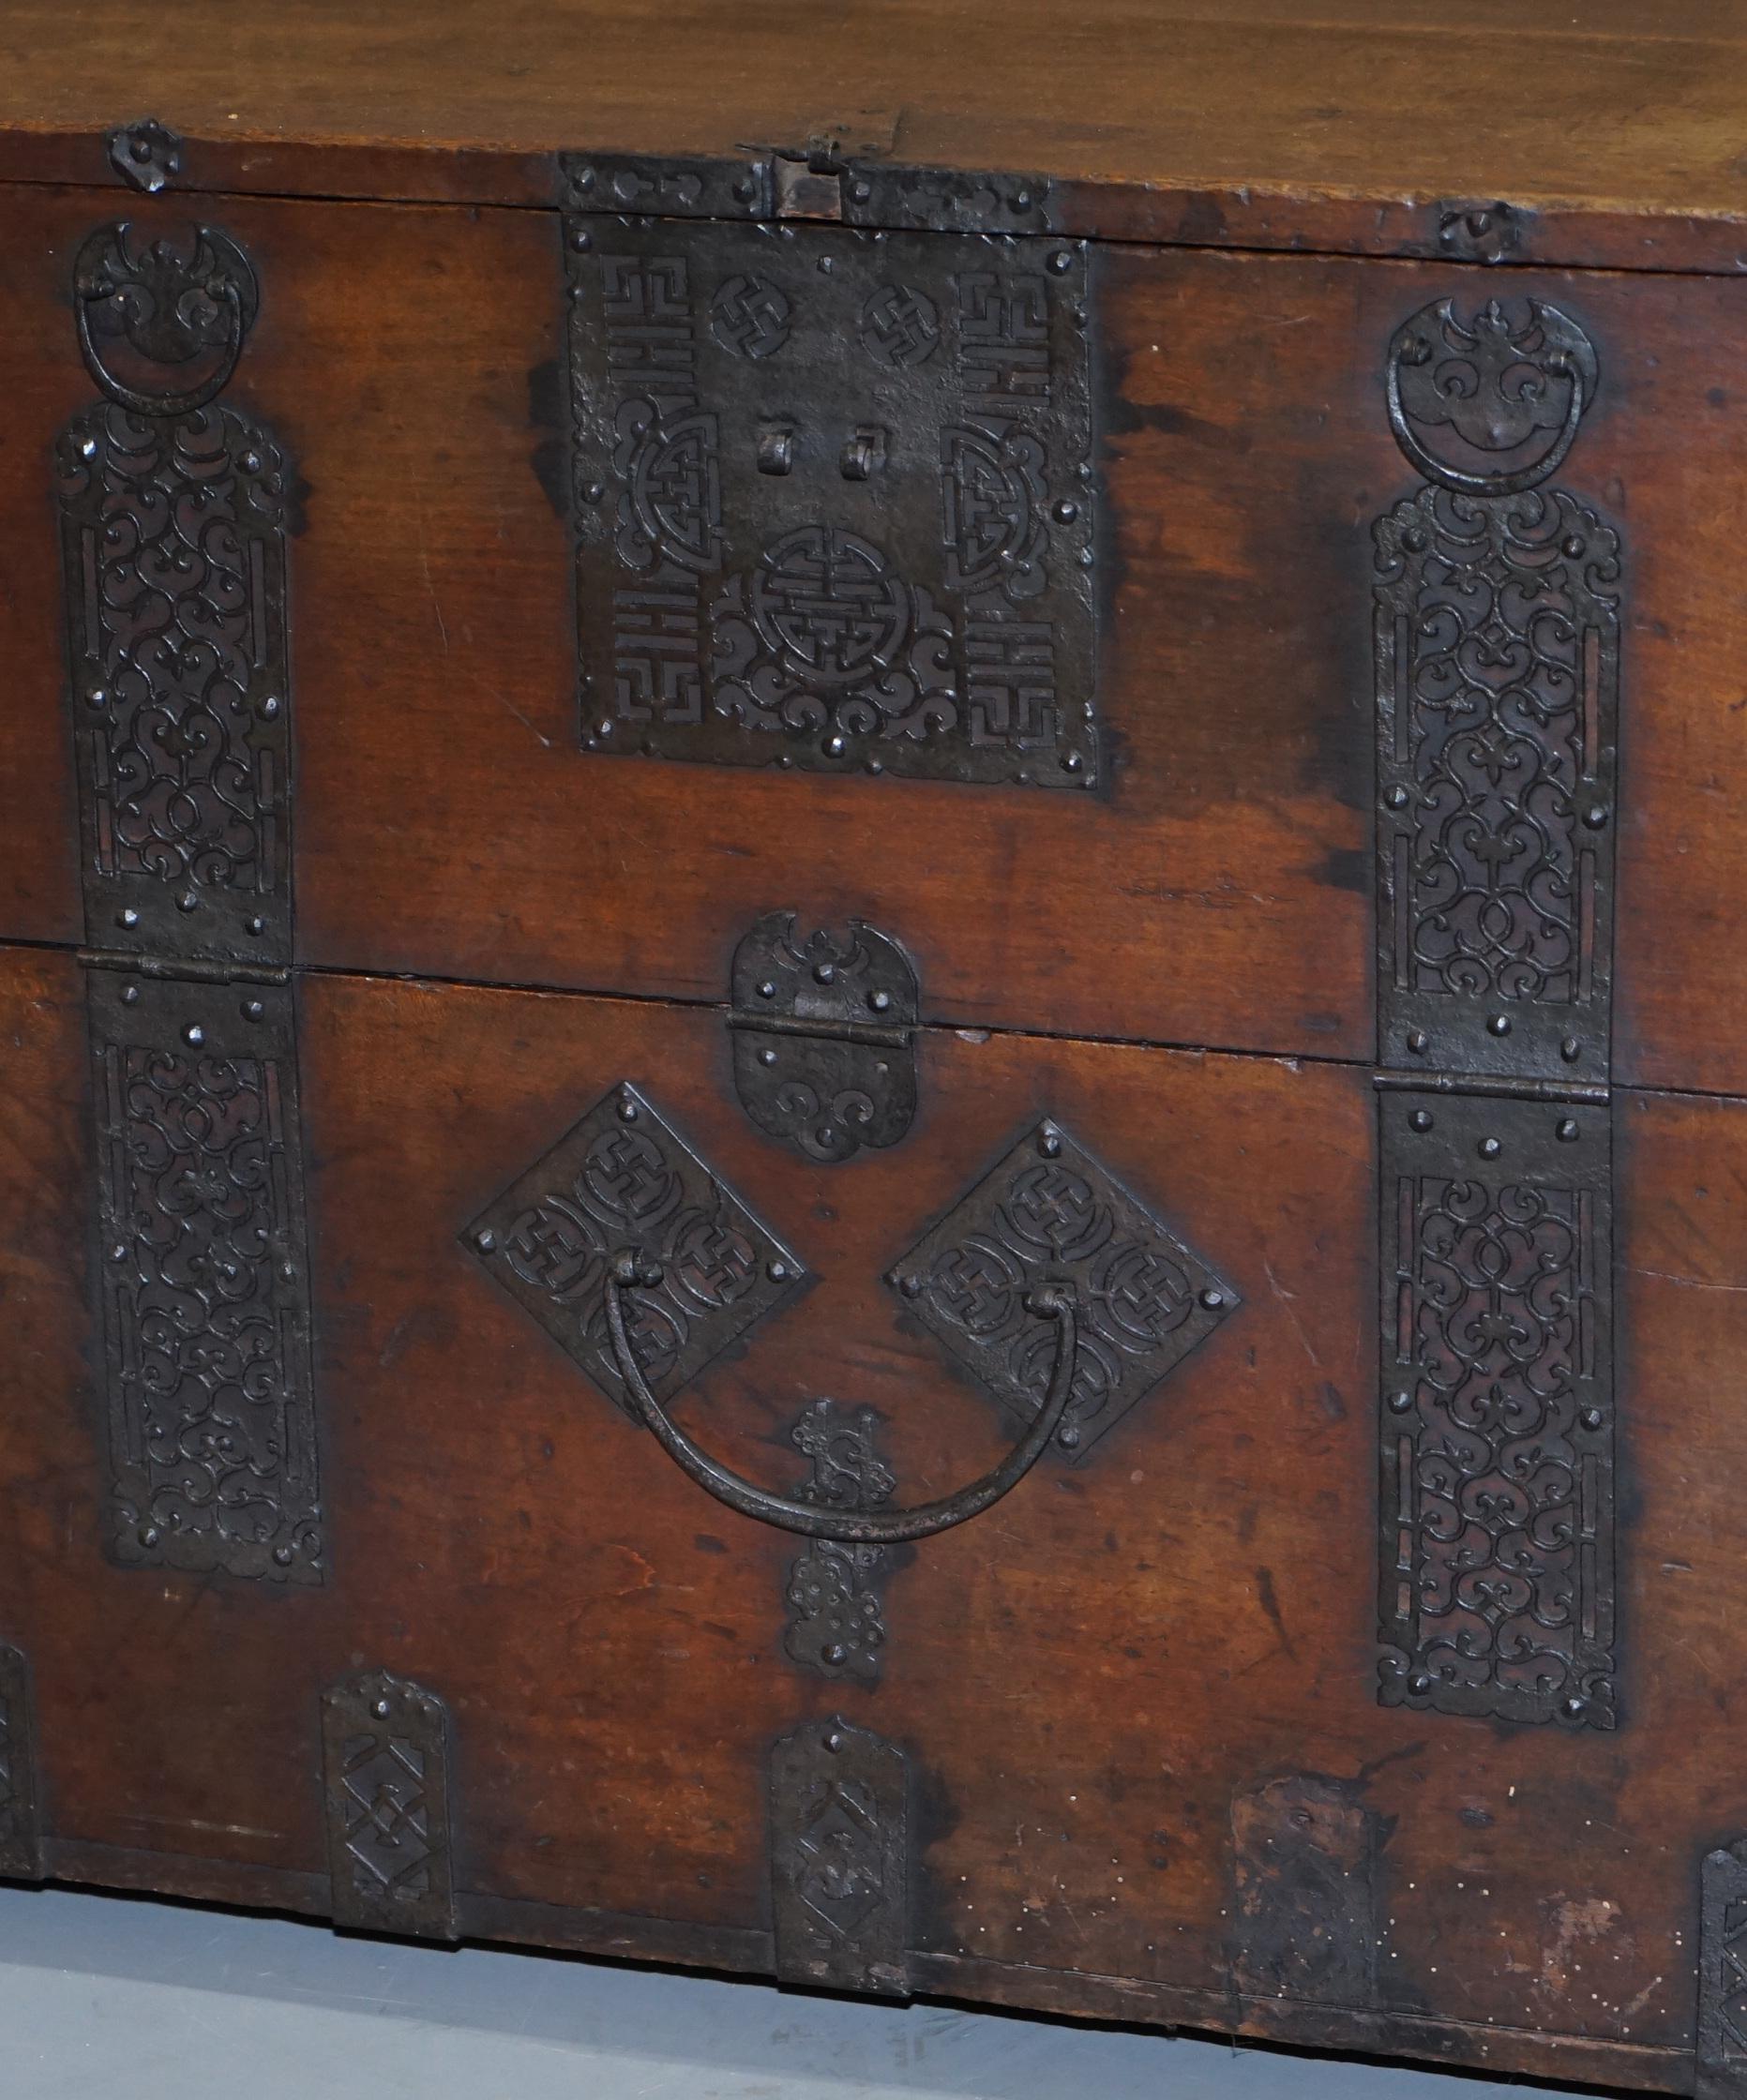 Wood Rare Chinese circa 1840 Campaign Chest Ornate Metal Work Swastika Well Being For Sale